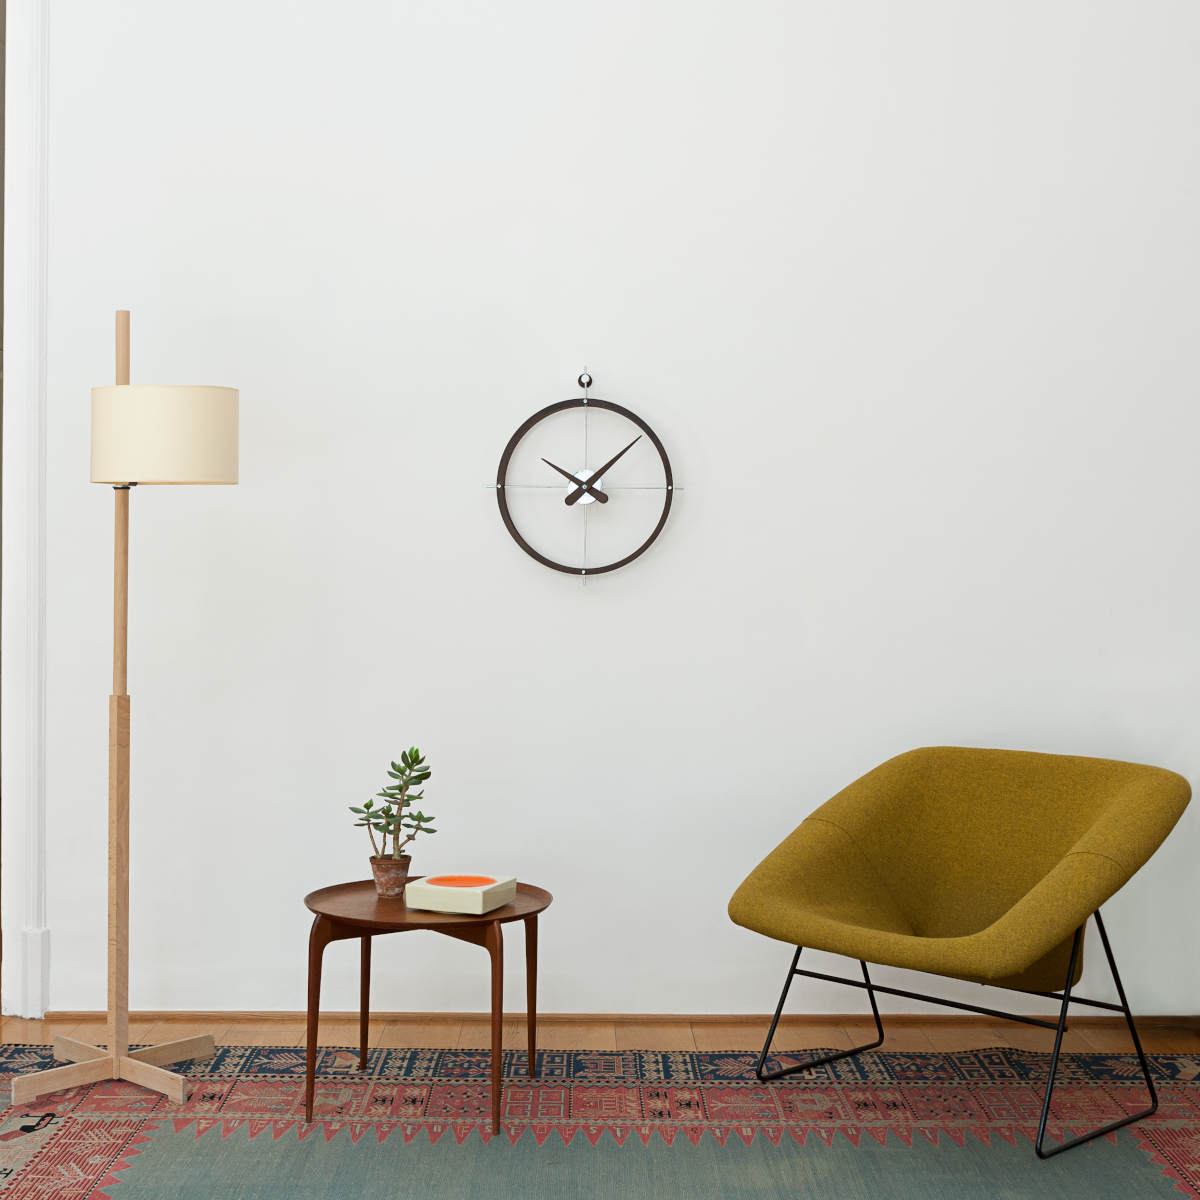 Design Wall Clock "2 Puntos" with Double Ring made of Wood / Steel / Brass Ø 43 cm